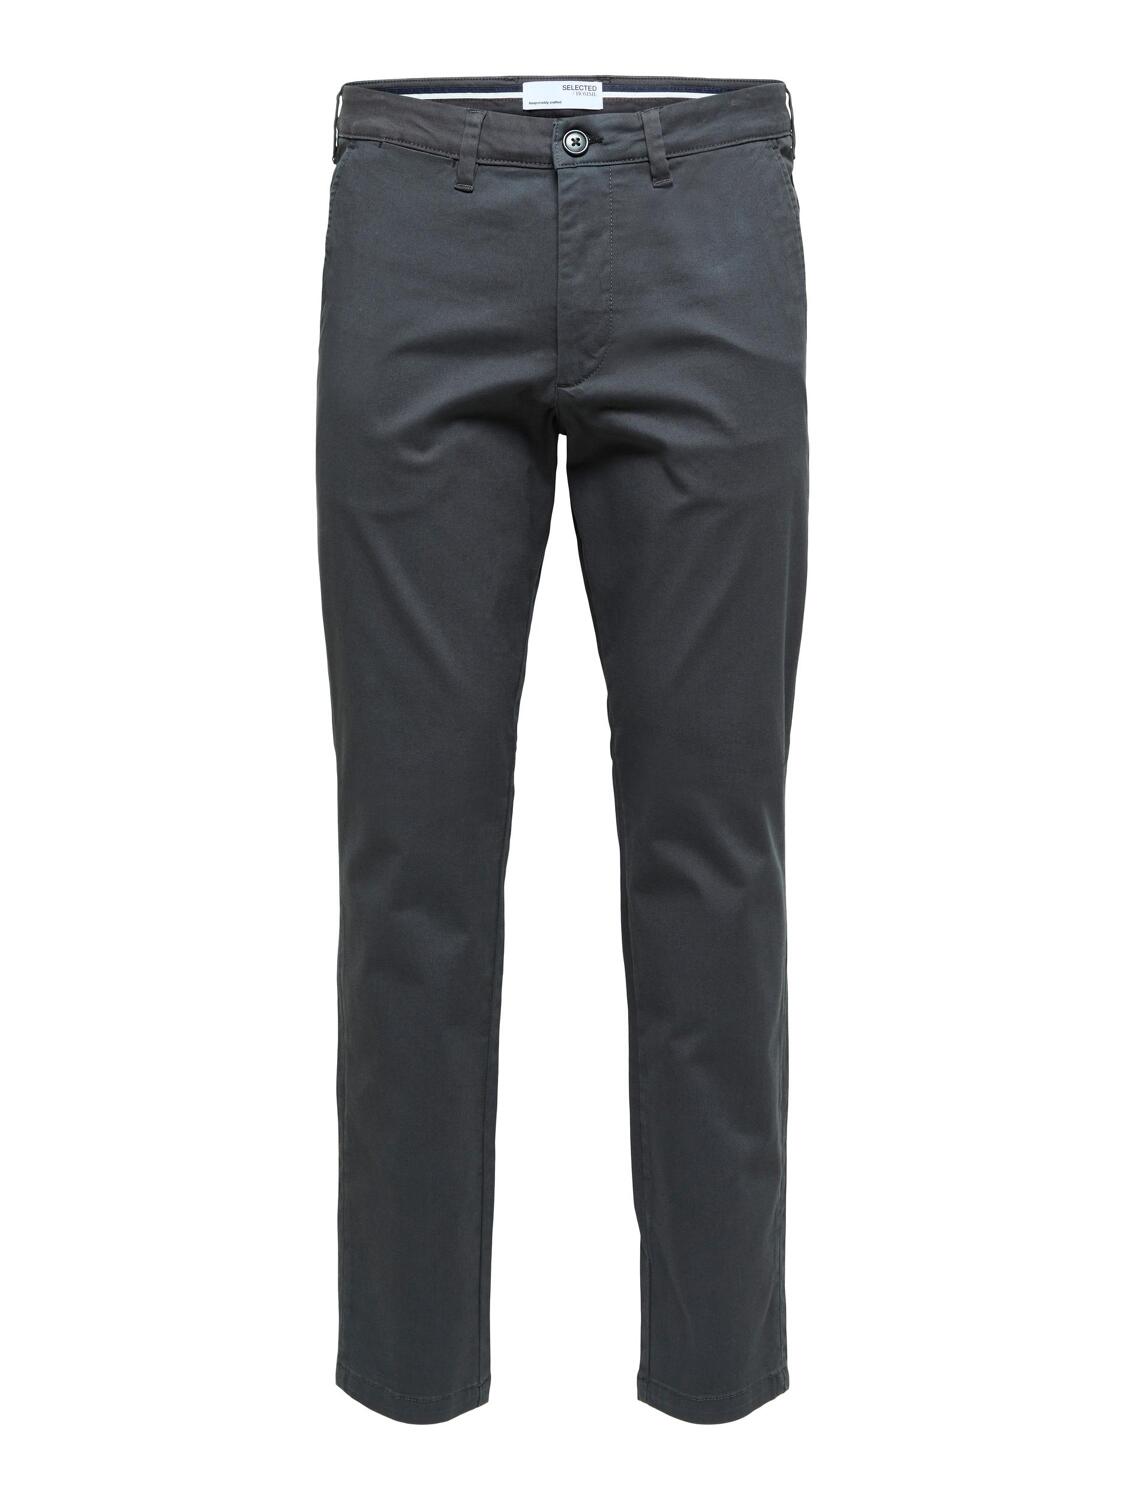 SELECTED HOMME SLHSLIM-MILES FLEX CHINO PANTS W NOOS | Deutschland